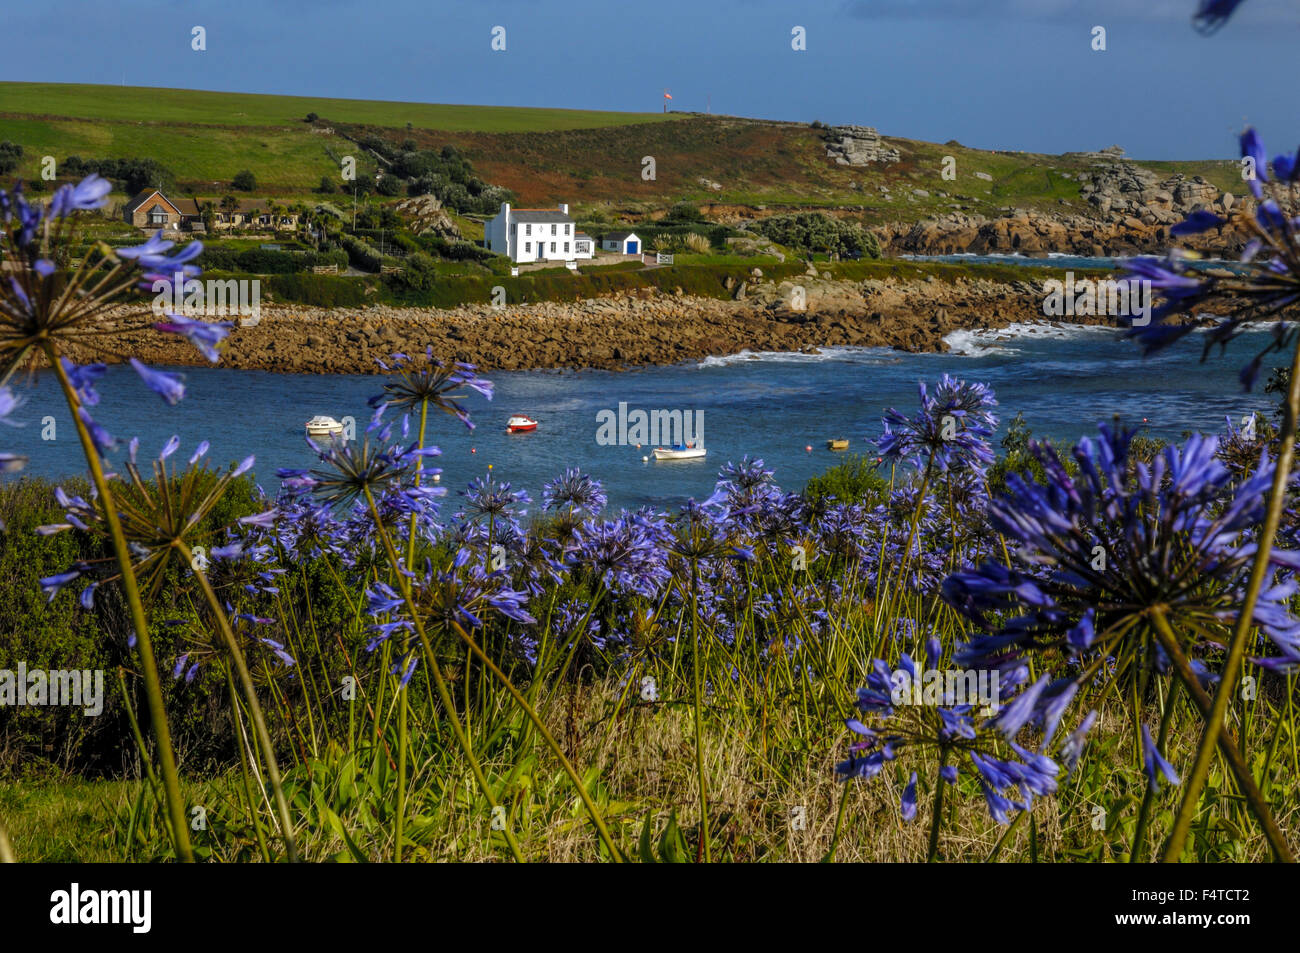 Agapanthus or Lily of the Nile plants growing along the coastline of old town bay. St Mary's. Isles of Scilly. Cornwall. England Stock Photo